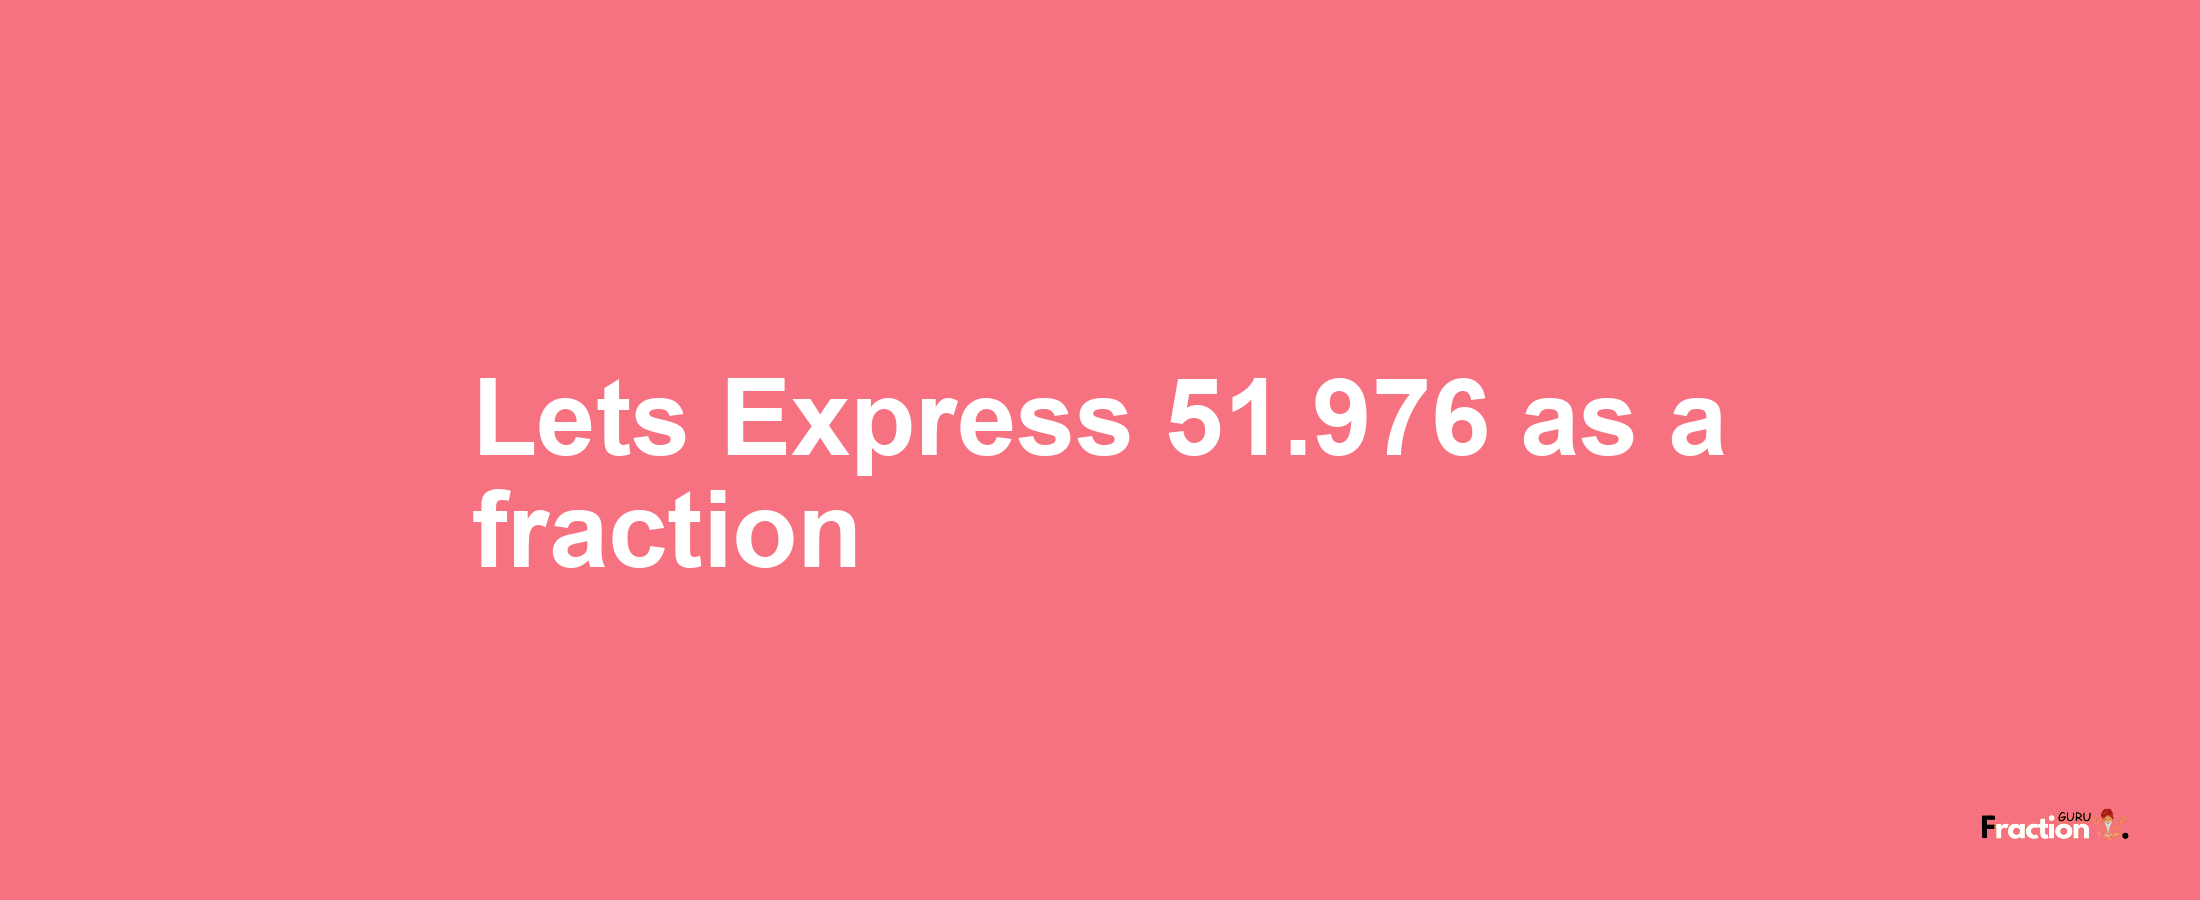 Lets Express 51.976 as afraction